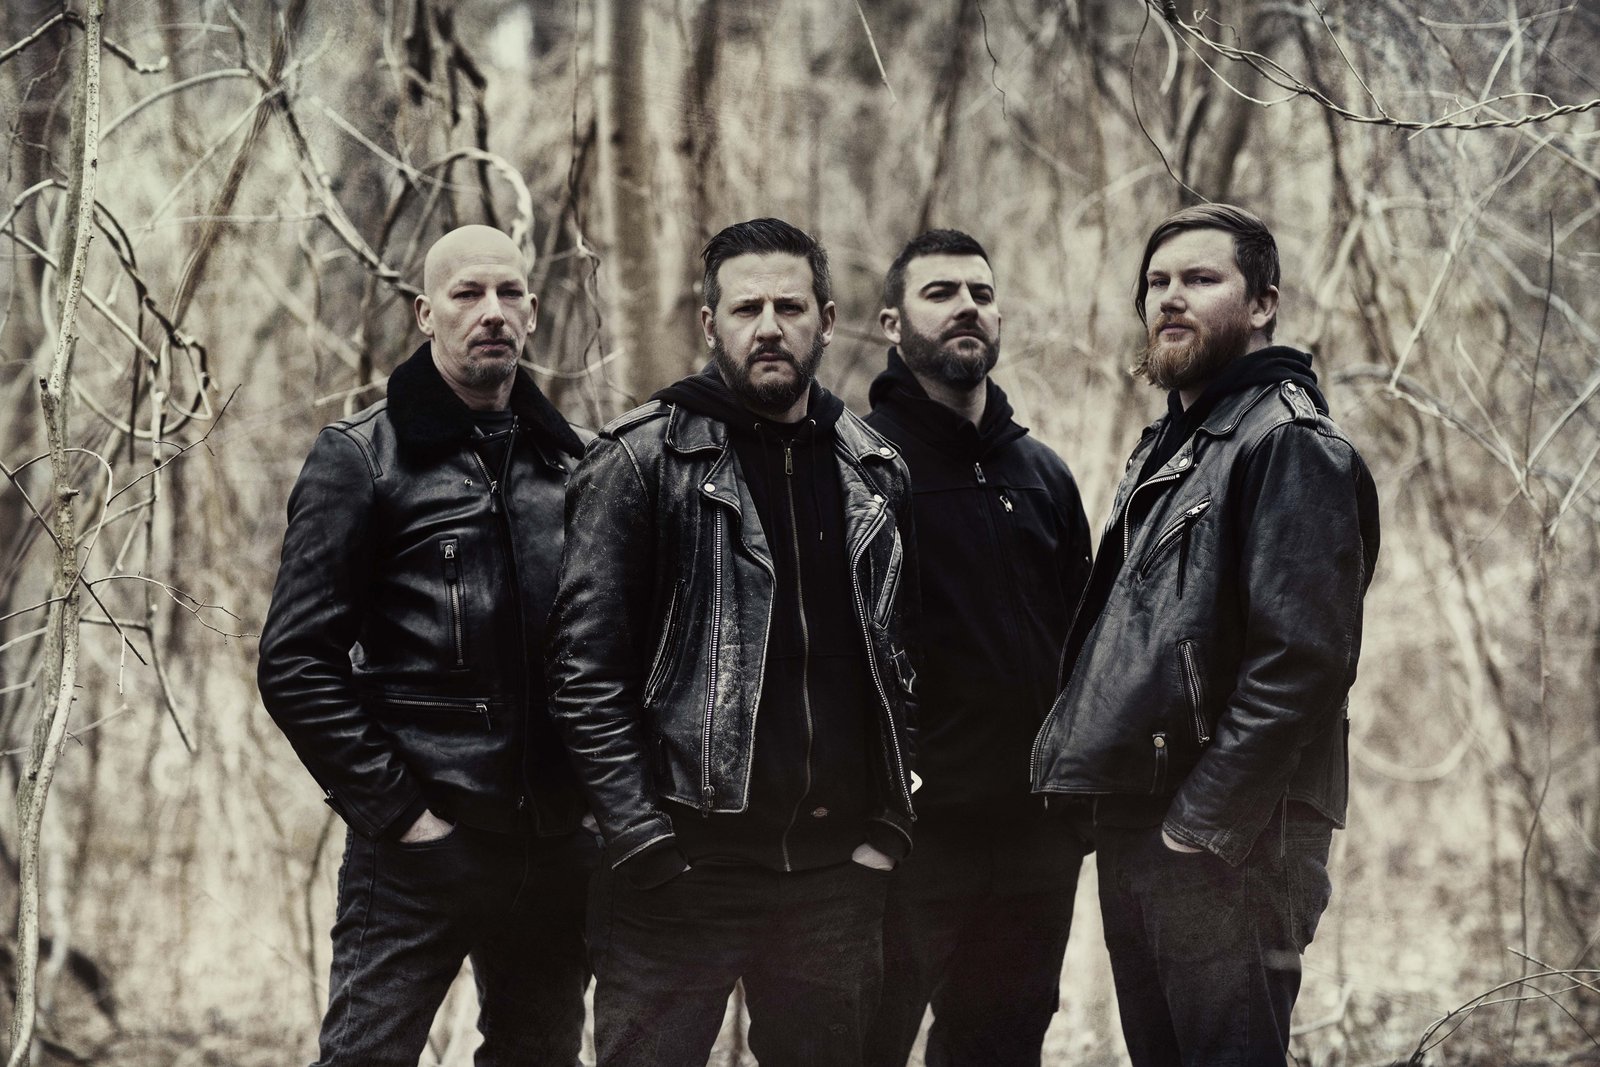 Misery Index – “Rituals Of Power”